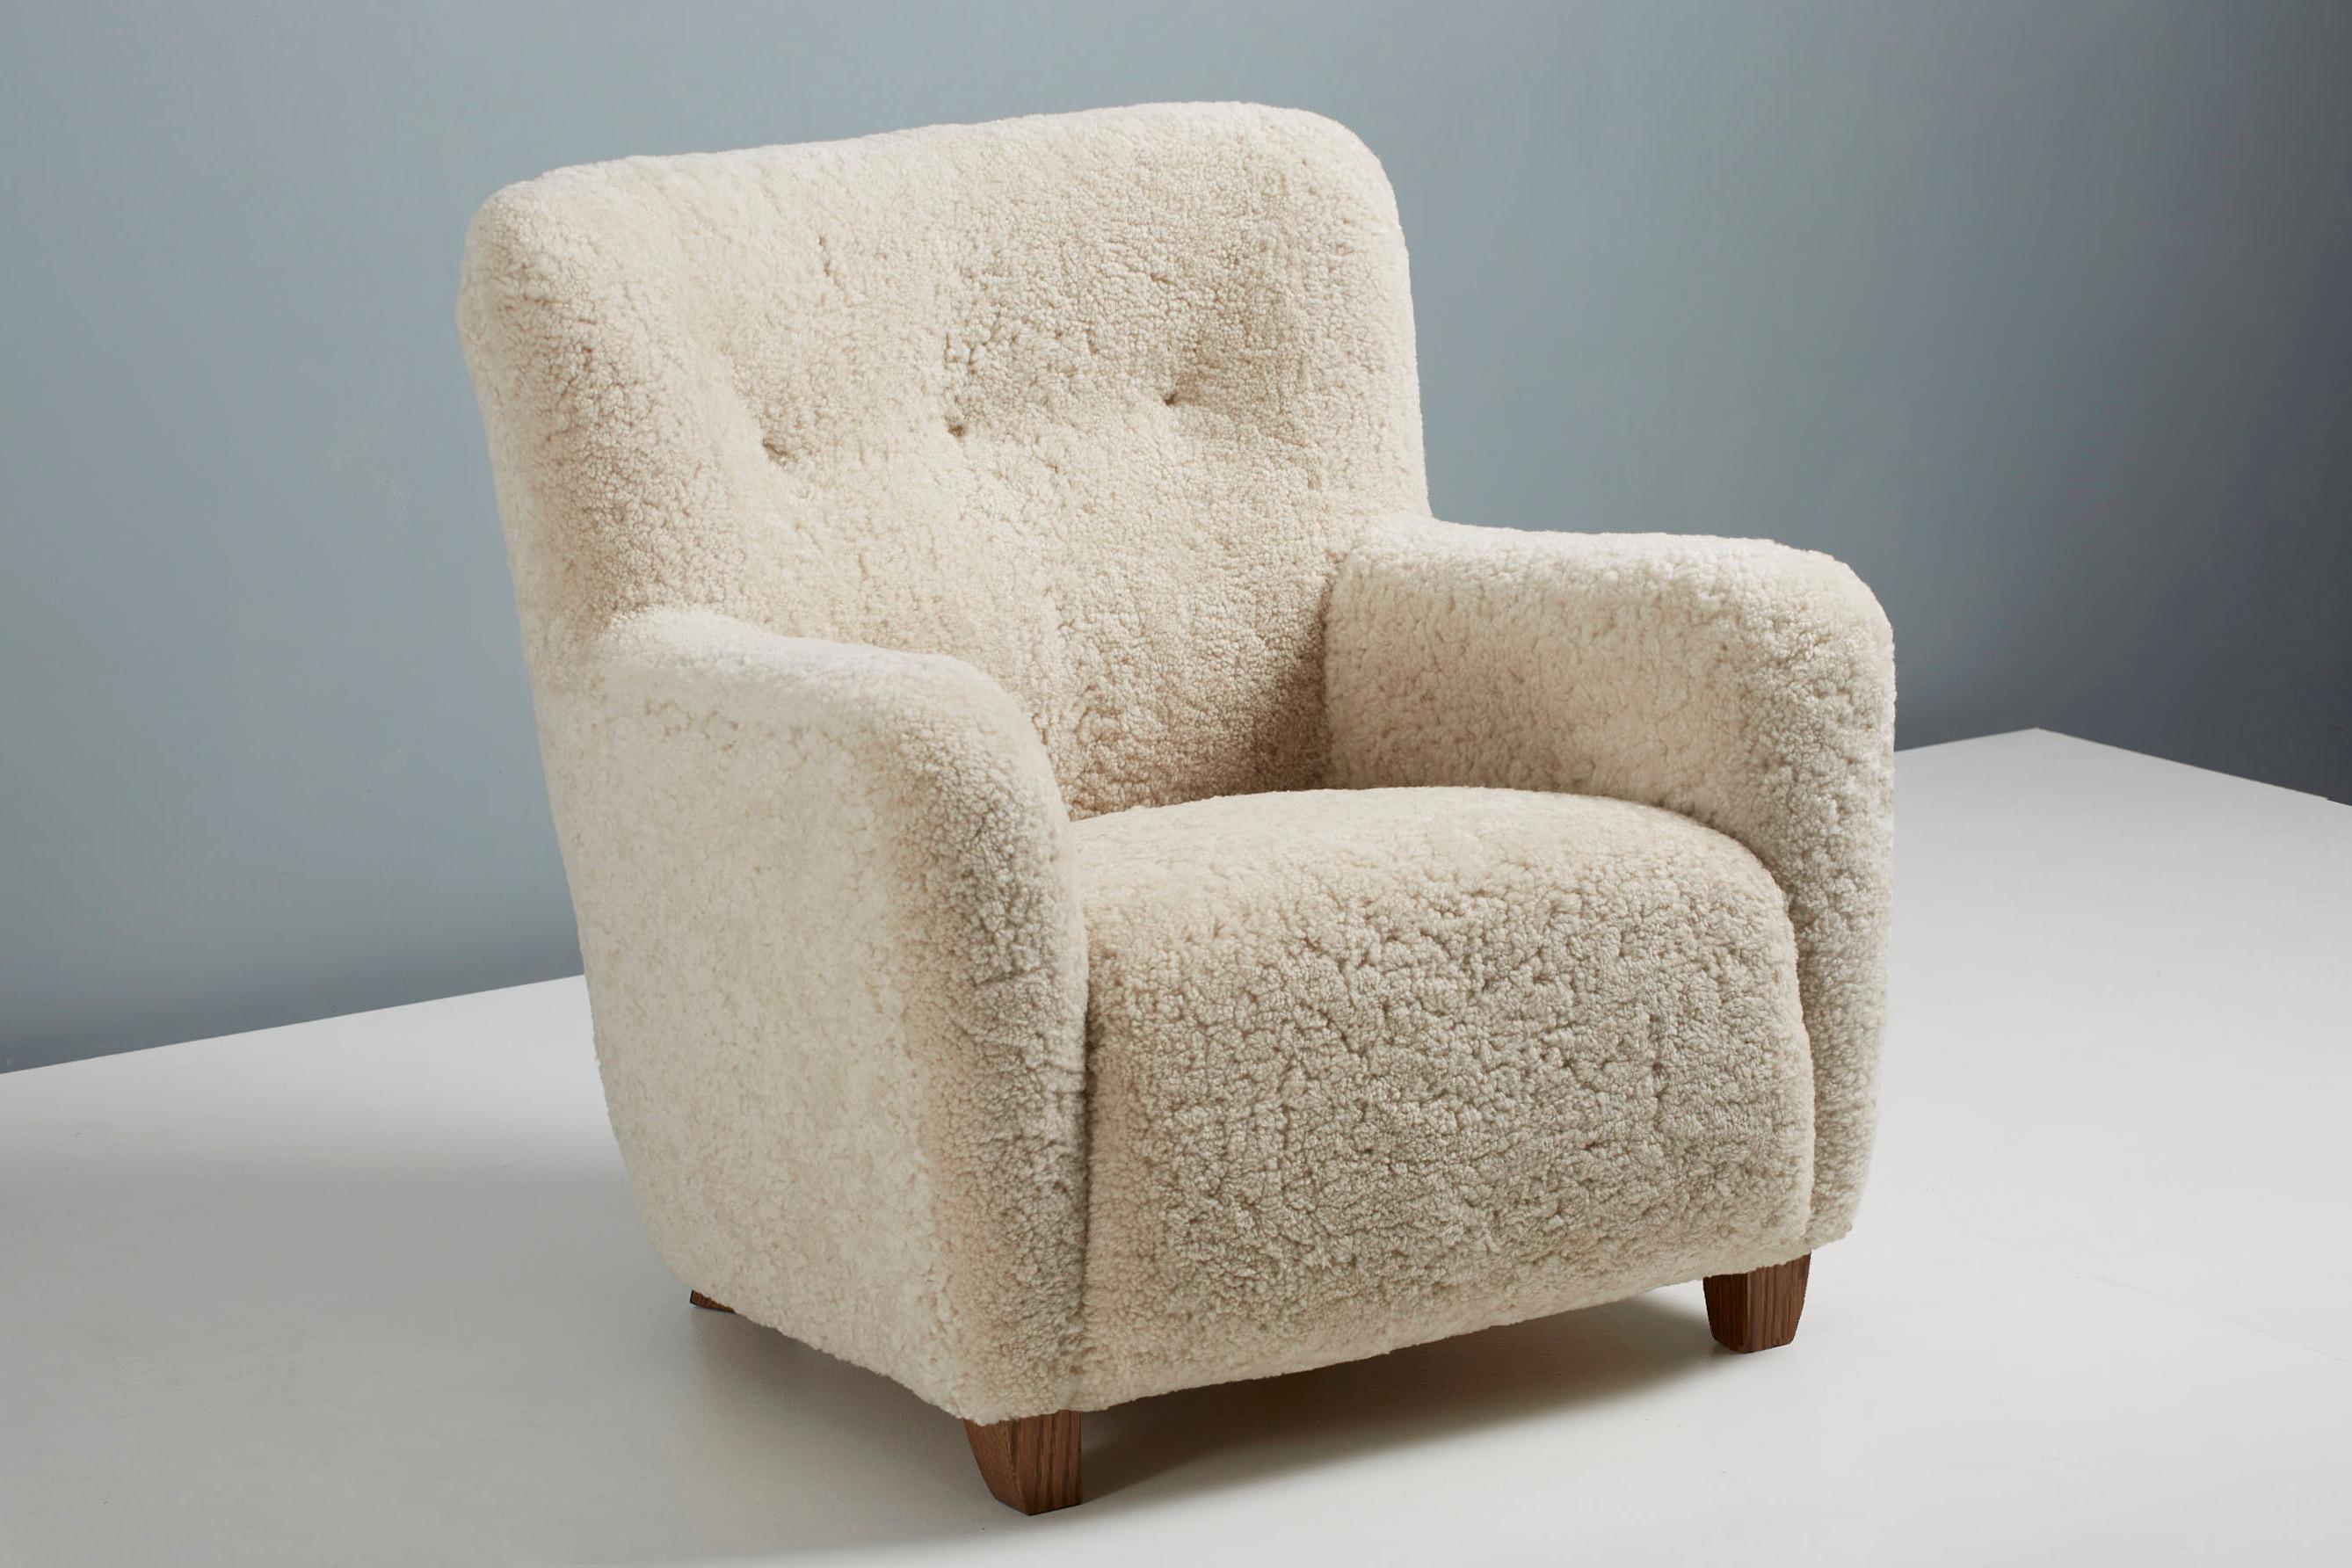 Pair of Jens Houmoller Klemmensen 1930s Sheepskin Lounge Chairs In New Condition For Sale In London, England